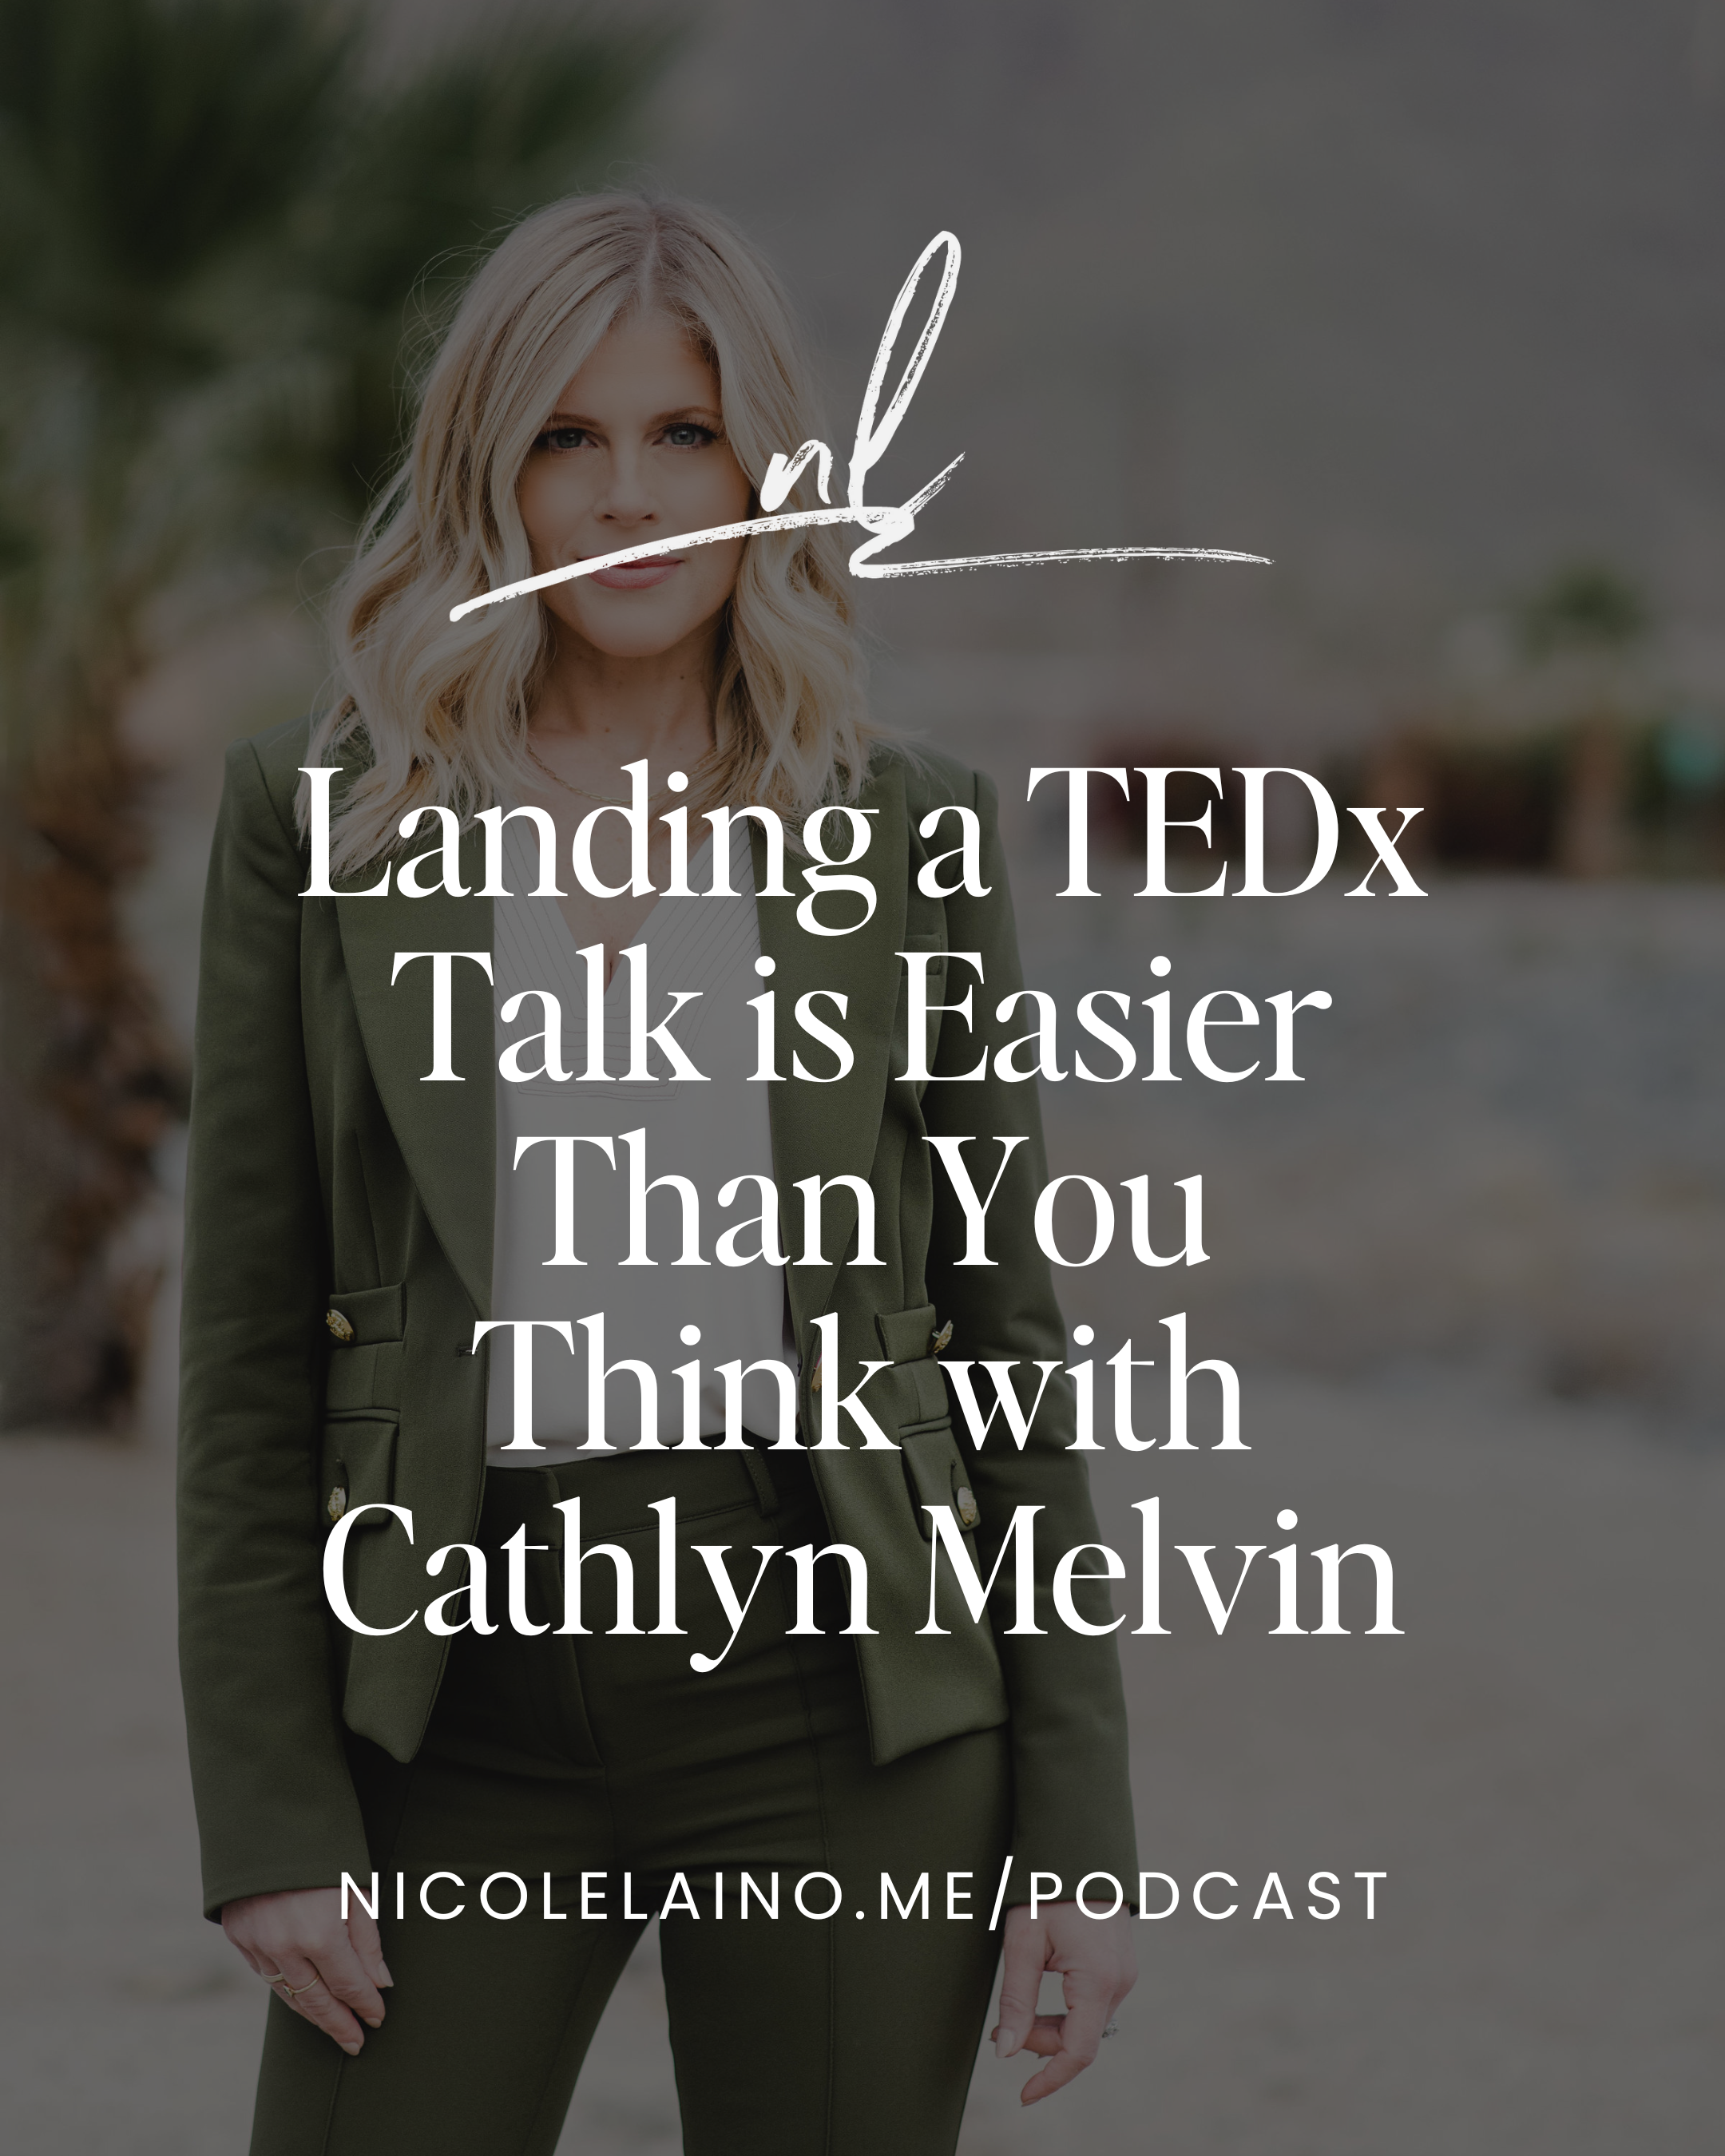 Landing a TEDx Talk is Easier Than You Think with Cathlyn Melvin